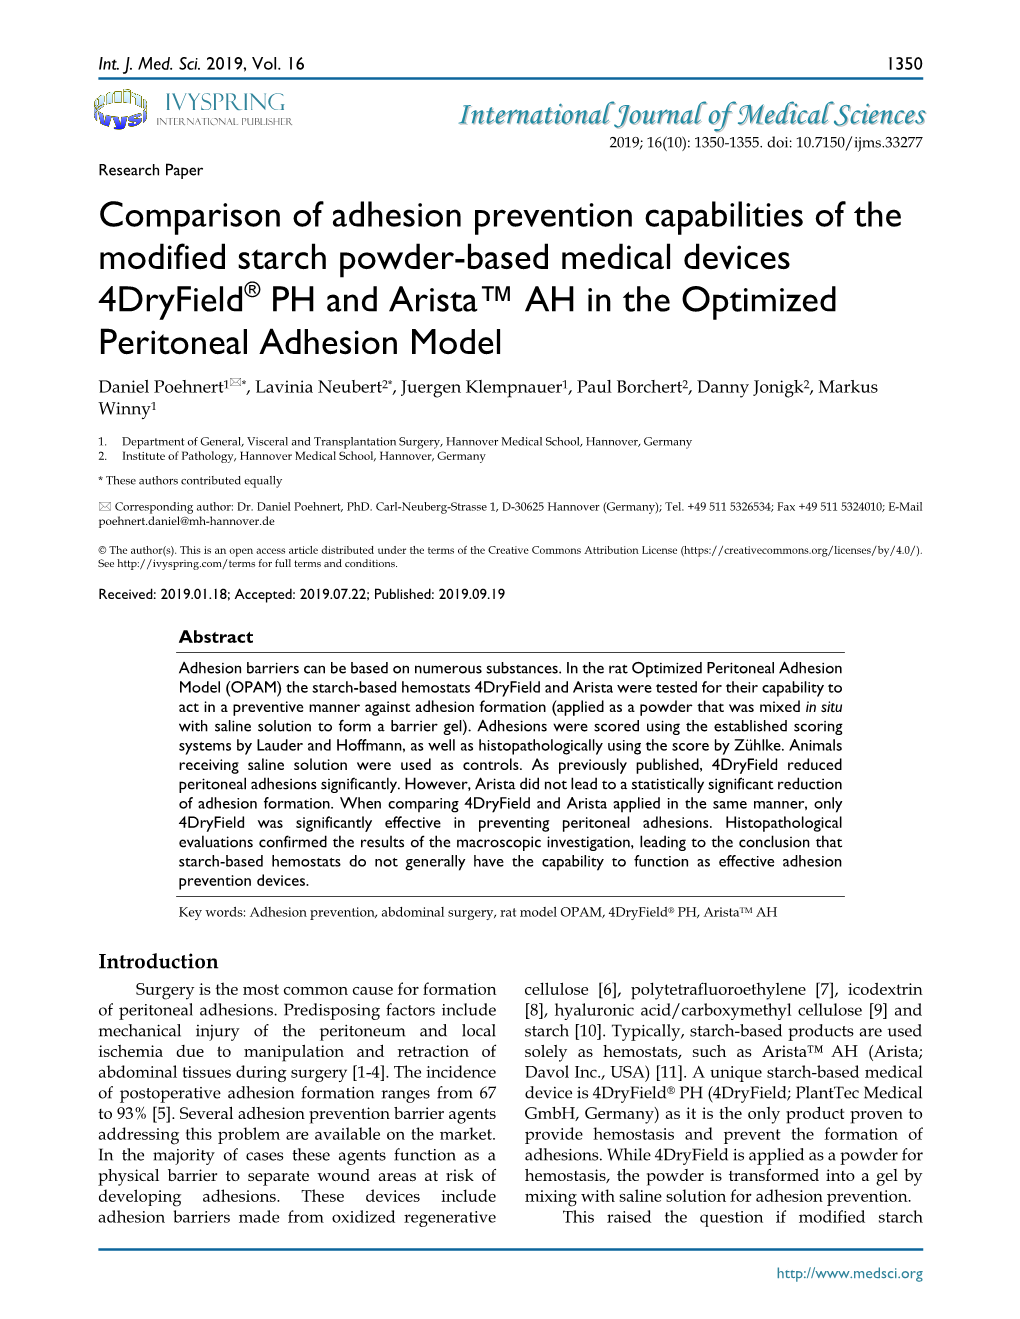 Comparison of Adhesion Prevention Capabilities of the Modified Starch